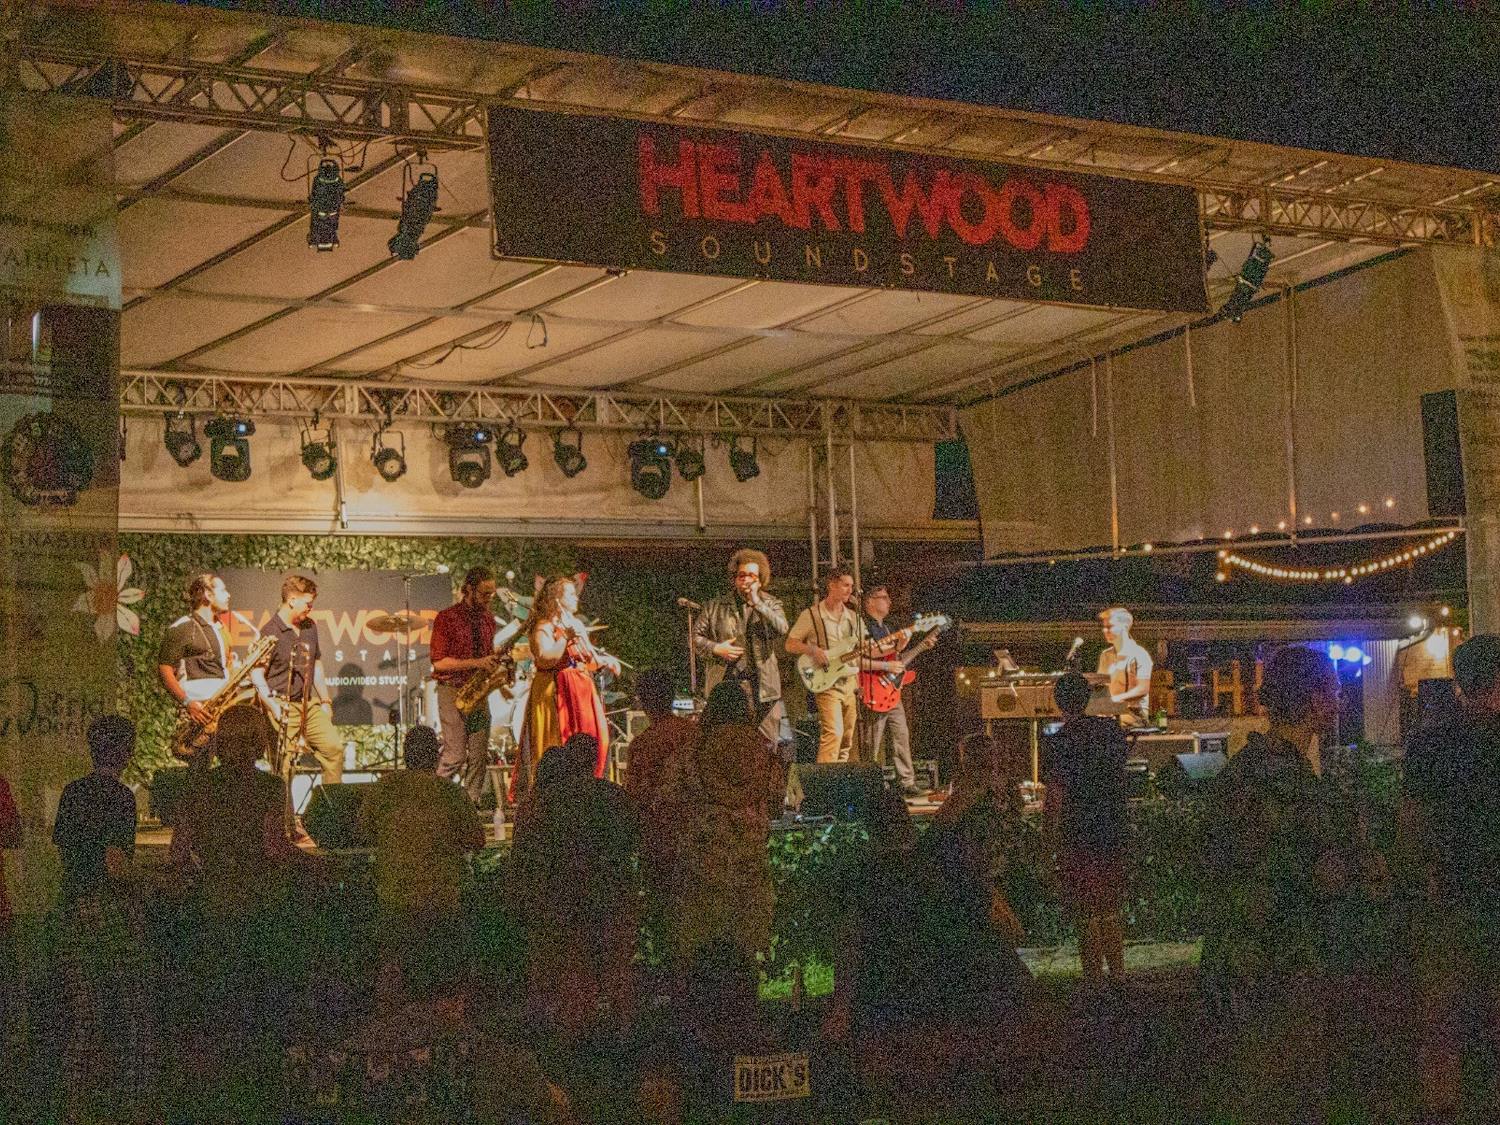 Savants of Soul perform at Heartwood Sound Friday, July 8 2022.